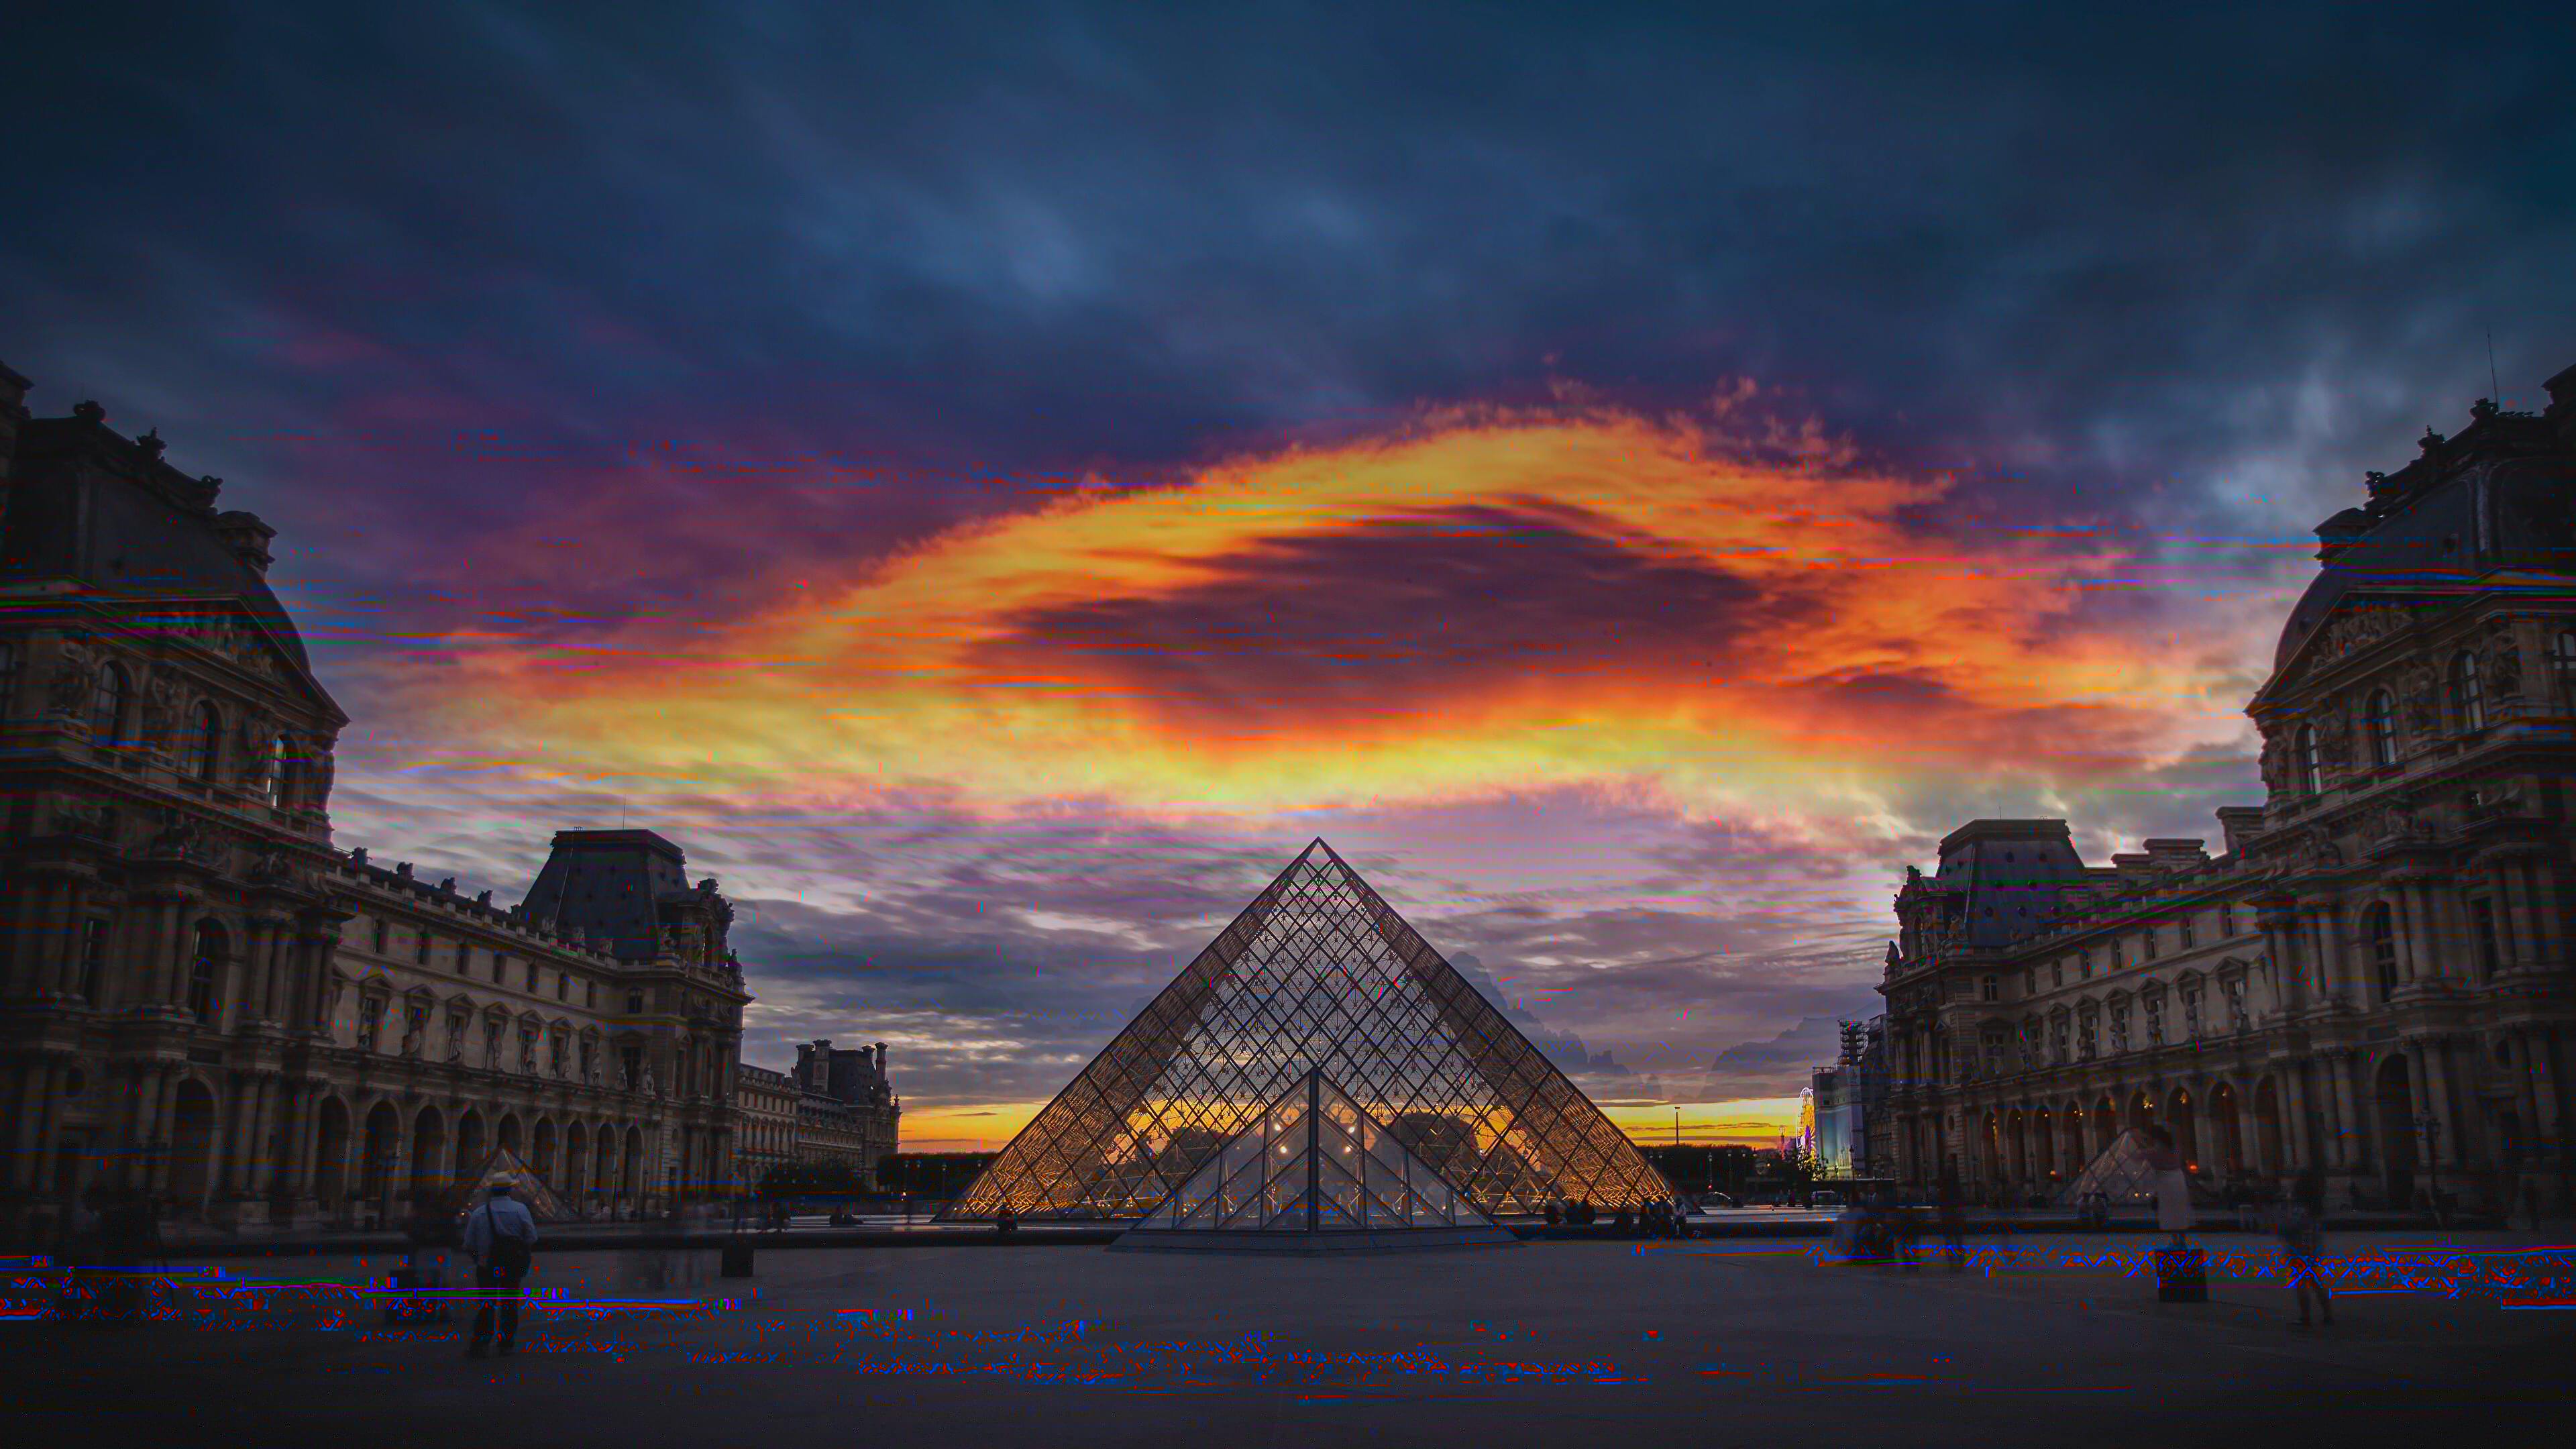 Paris 4K wallpaper for your desktop or mobile screen free and easy to download